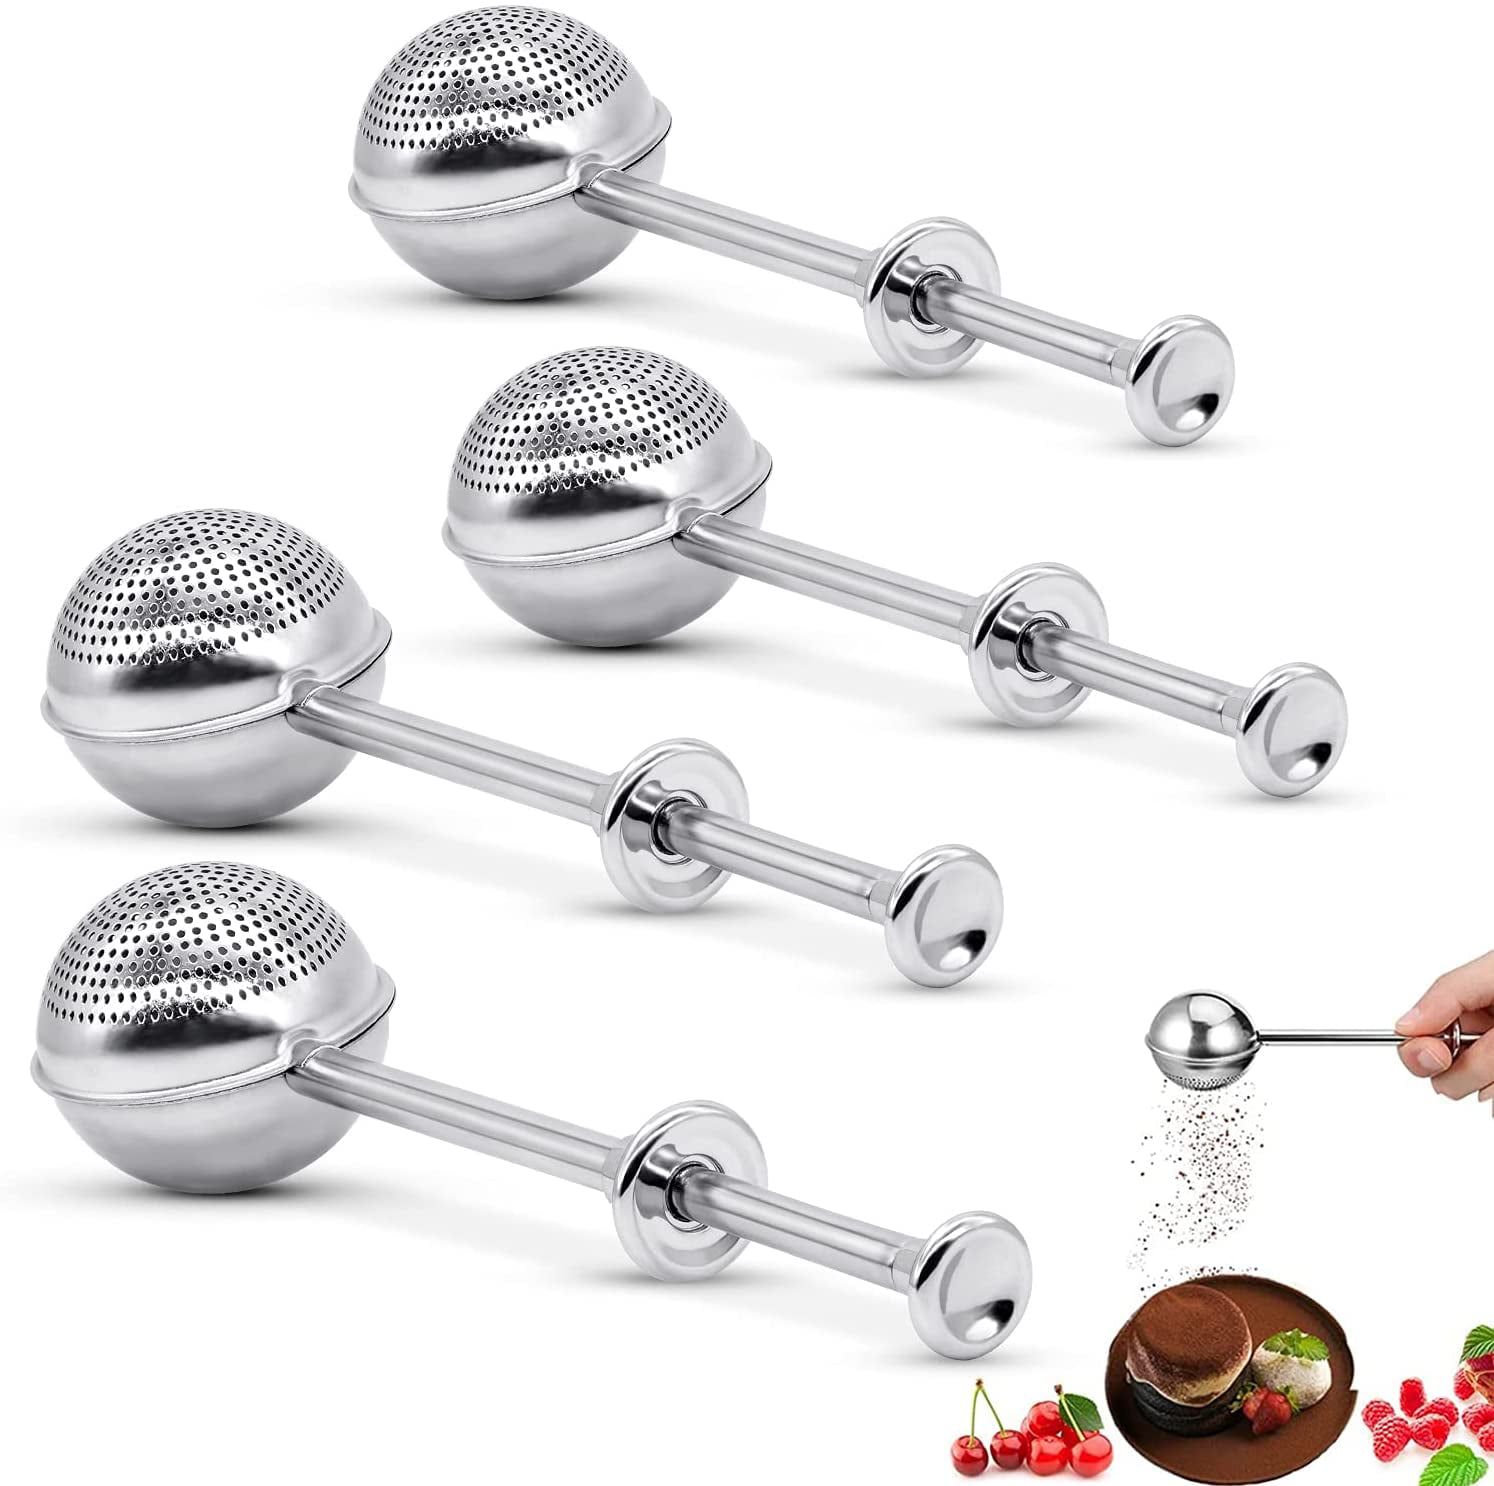 HOUCOCA 4Pcs Powdered Sugar Flour Sugar Shakers Used For Powdered Sugar And Spices Stainless Sugar Dispenser One-Hand Dust Collector Sifter For Baking Baking Sieve